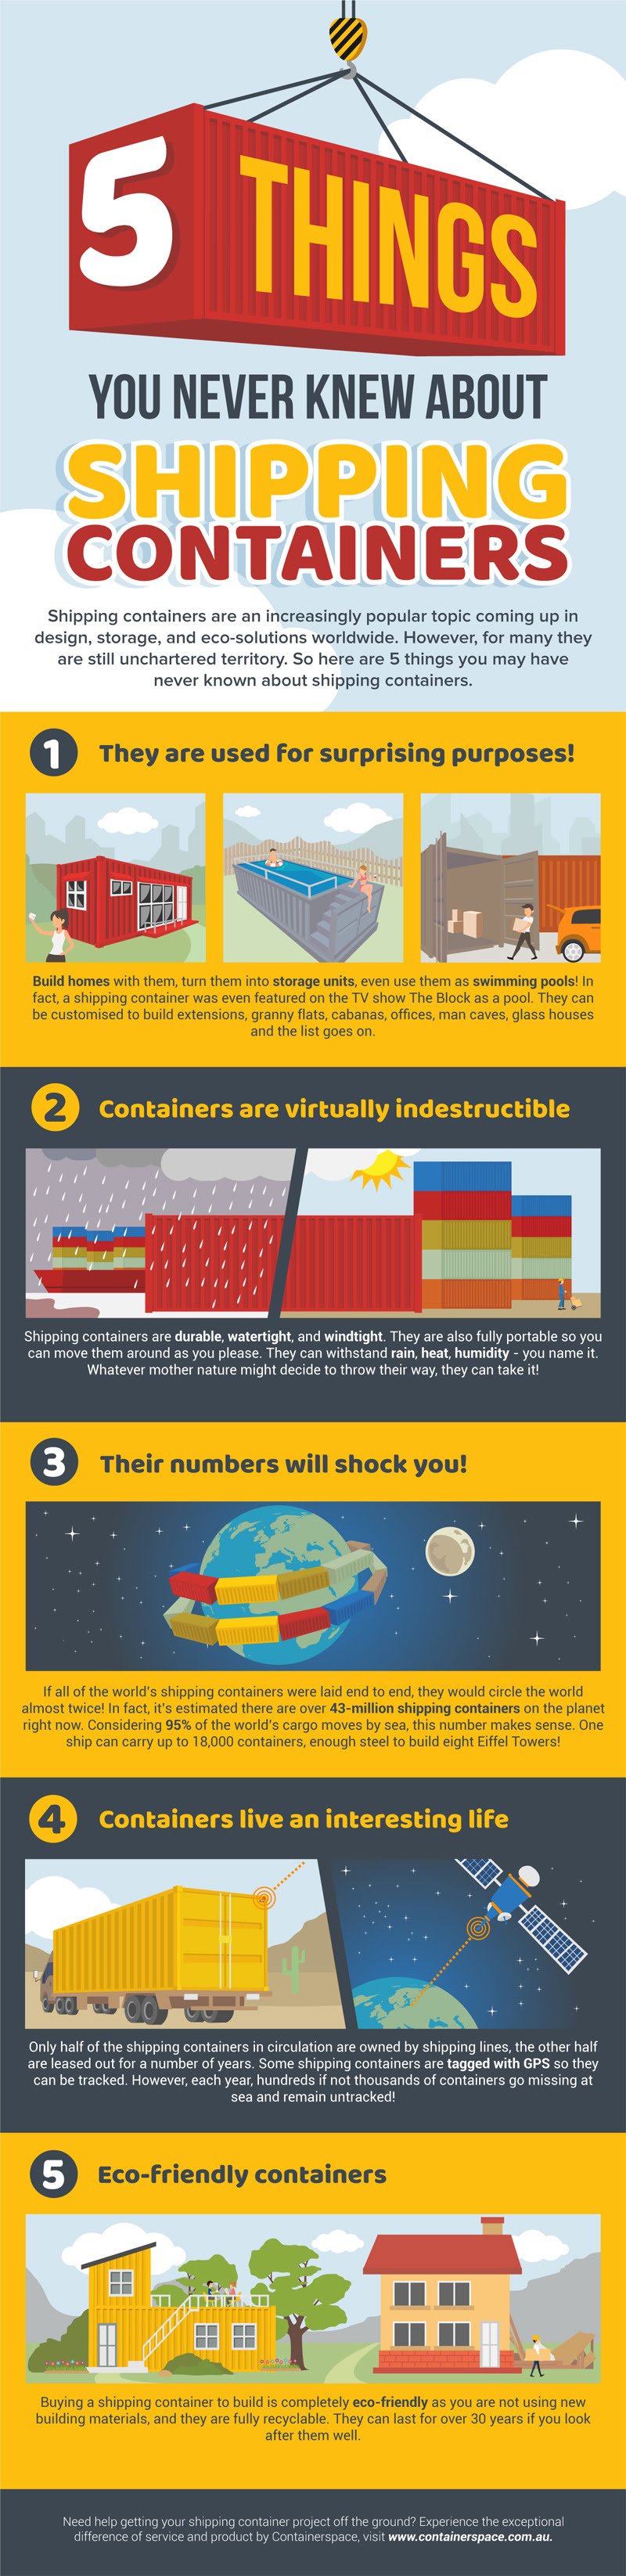 5 Things You Never Knew About Shipping Containers #infographic